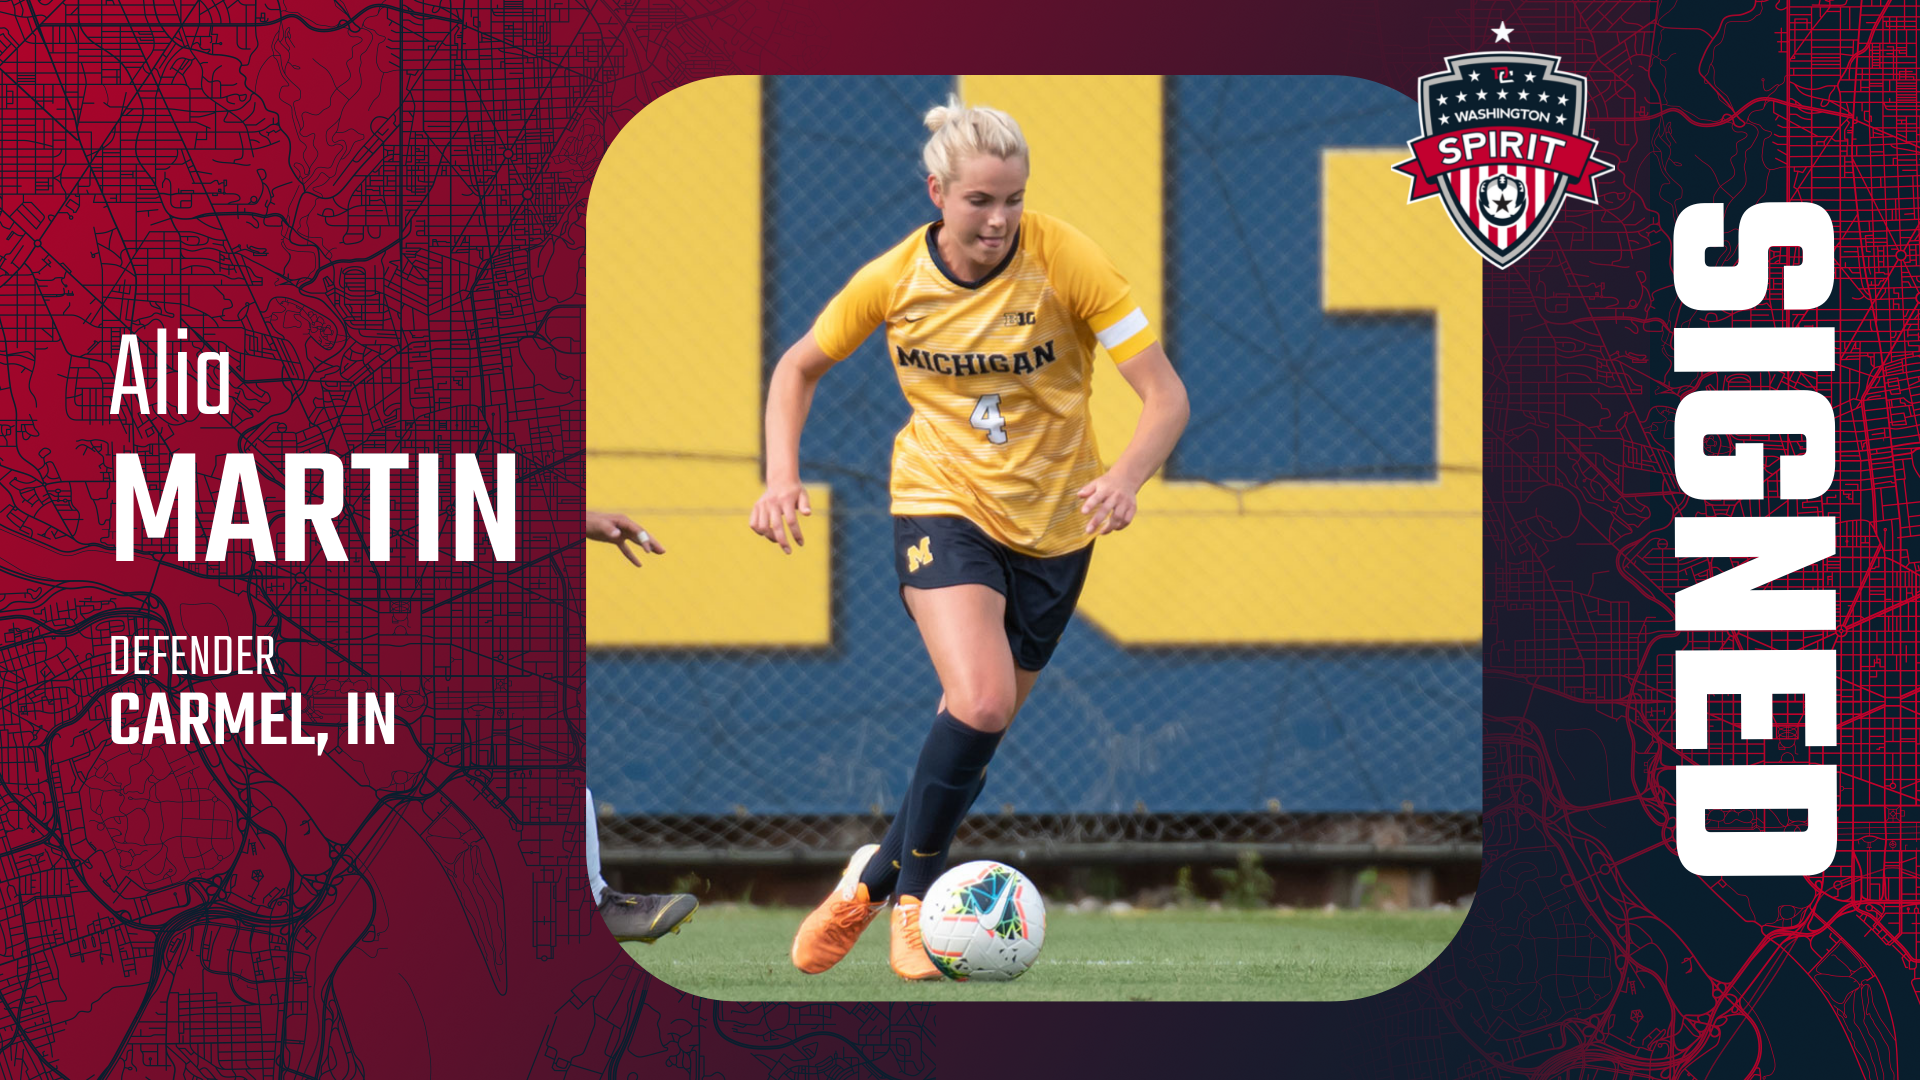 Washington Spirit Sign Defender Alia Martin to One-Year Contract Featured Image